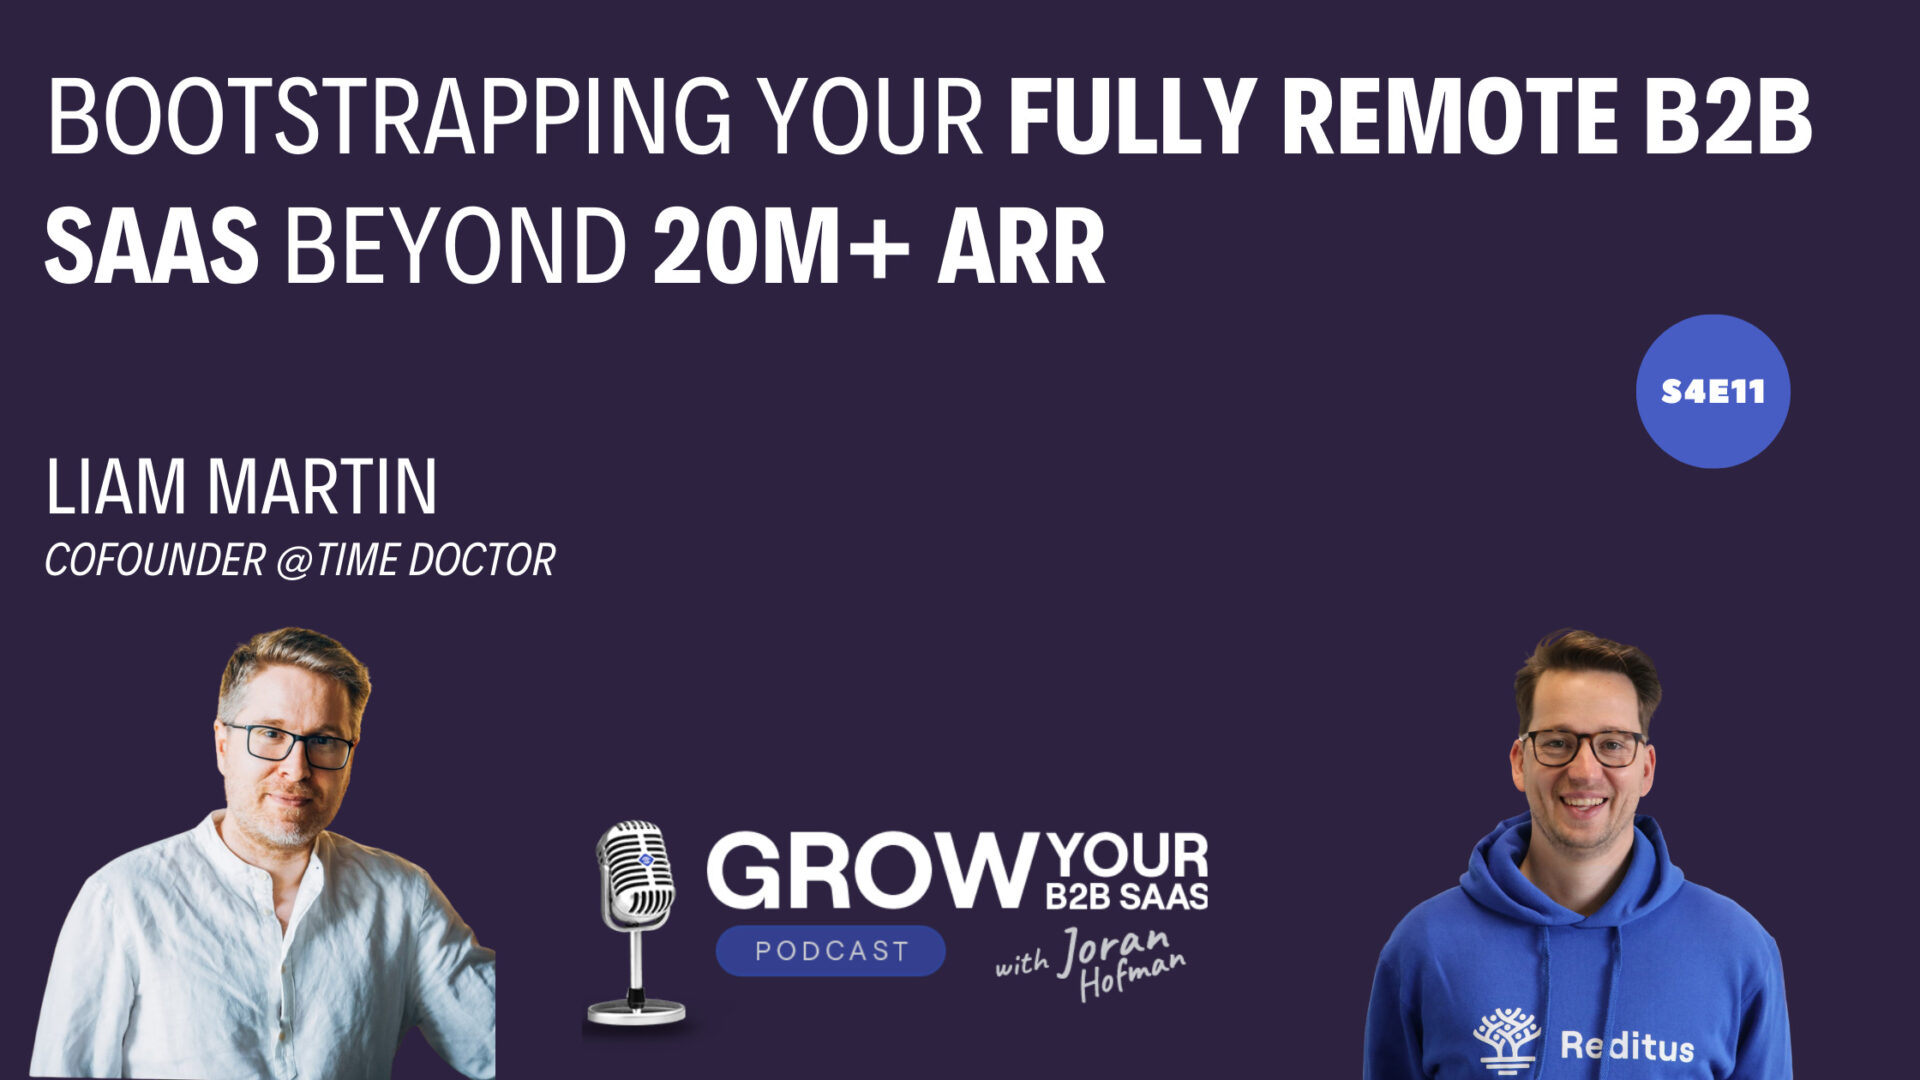 https://www.getreditus.com/podcast/s4e11-bootstrapping-your-fully-remote-b2b-saas-beyond-20m-arr-with-liam-martin/